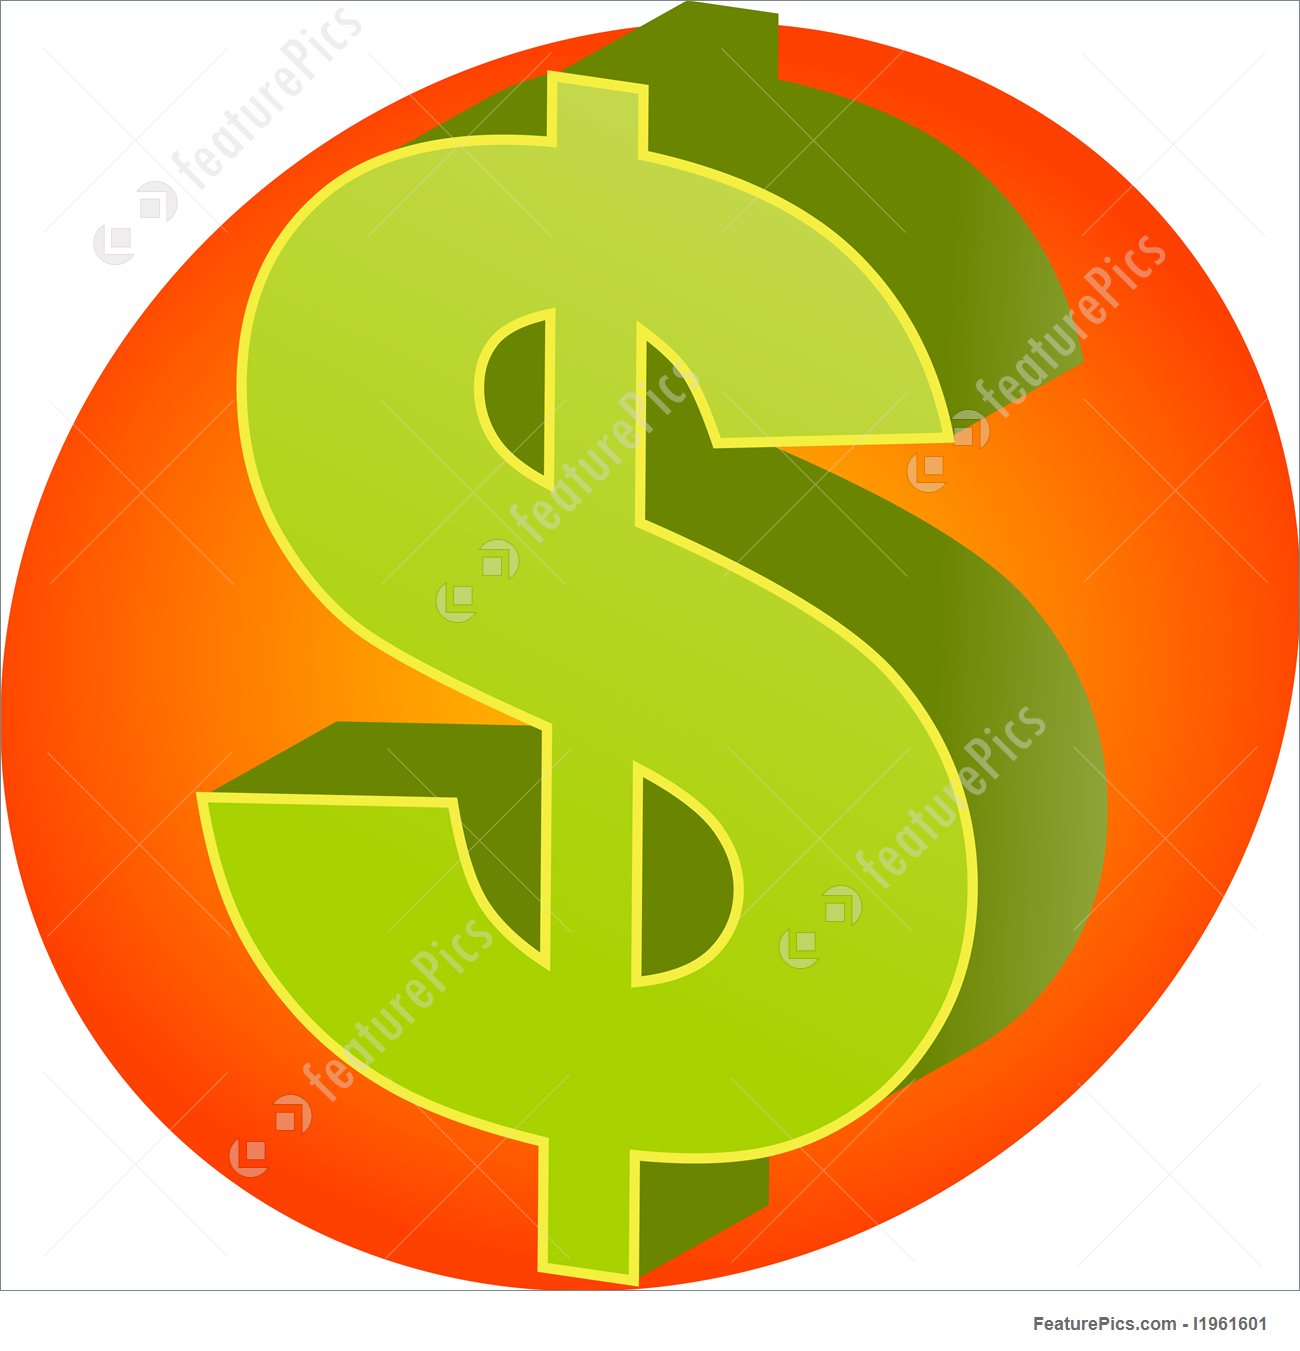 Free download best on. Economy clipart small money